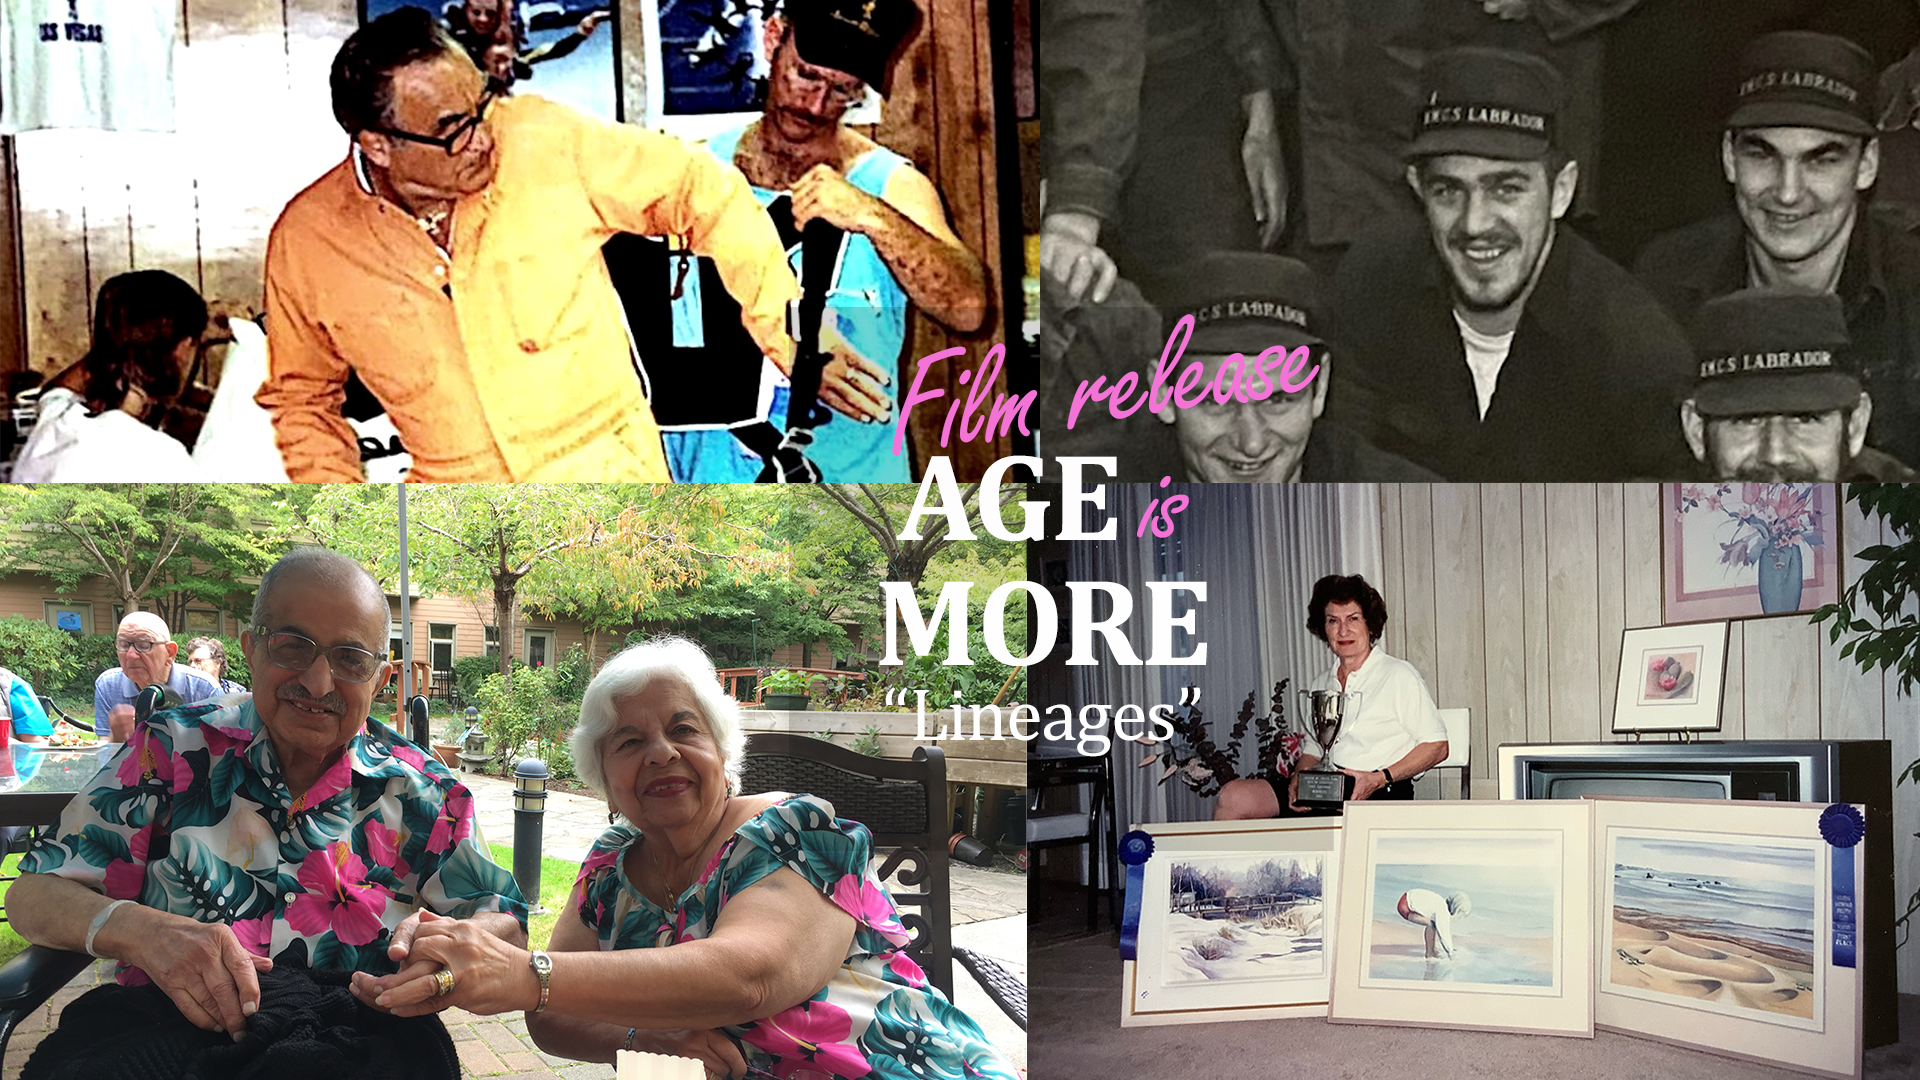 "Lineages," the latest Revera and Reel Youth Age Is More intergenerational film premieres on August 26 on Revera's Facebook page. Youth filmmakers from across Canada tell the stories of seniors from Surrey BC and Regina and Saskatoon, Saskatchewan. 